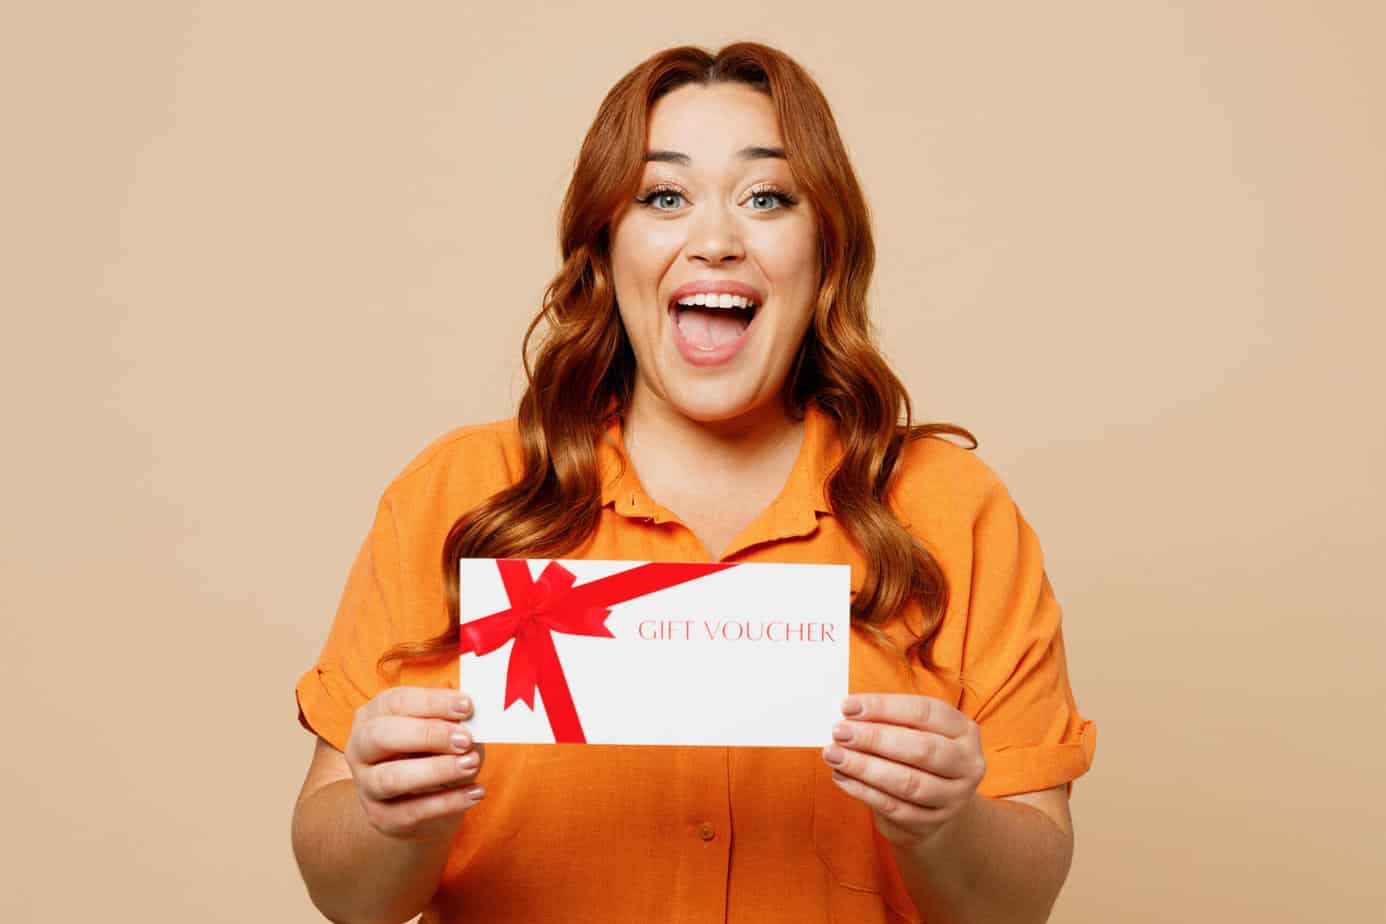 A woman holding up a gift certificate on a beige background.